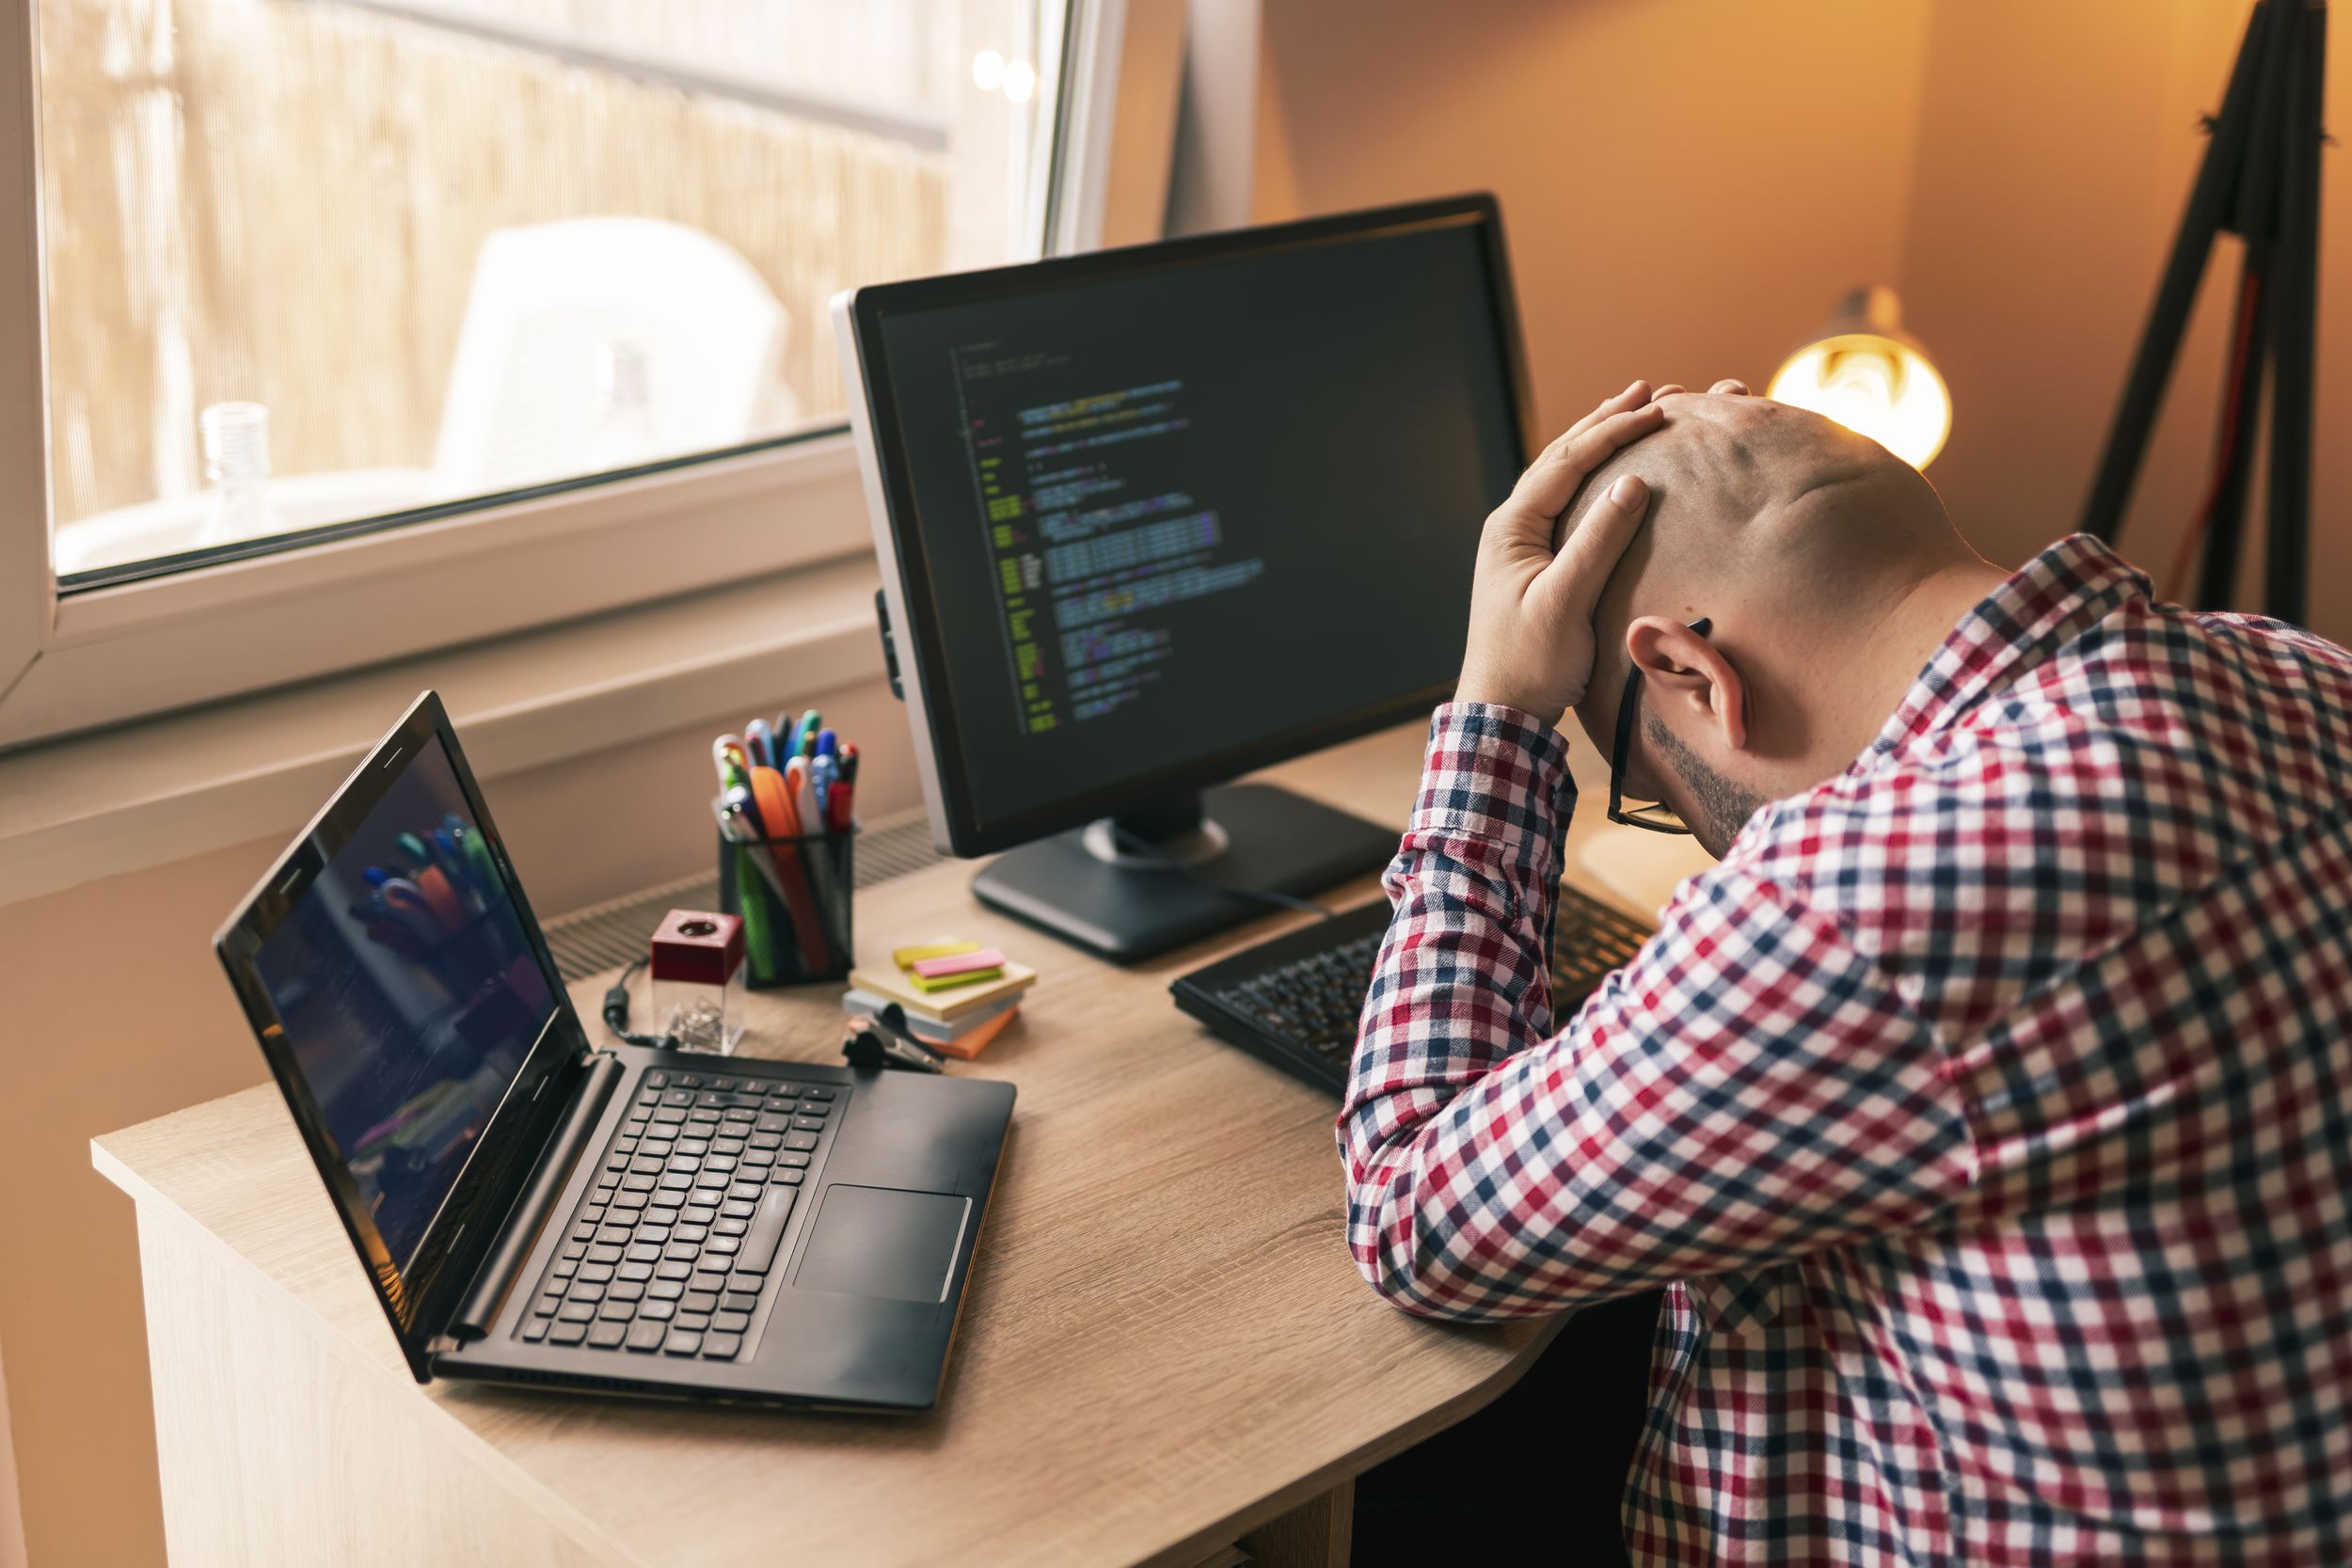 Software developer stressed out at work